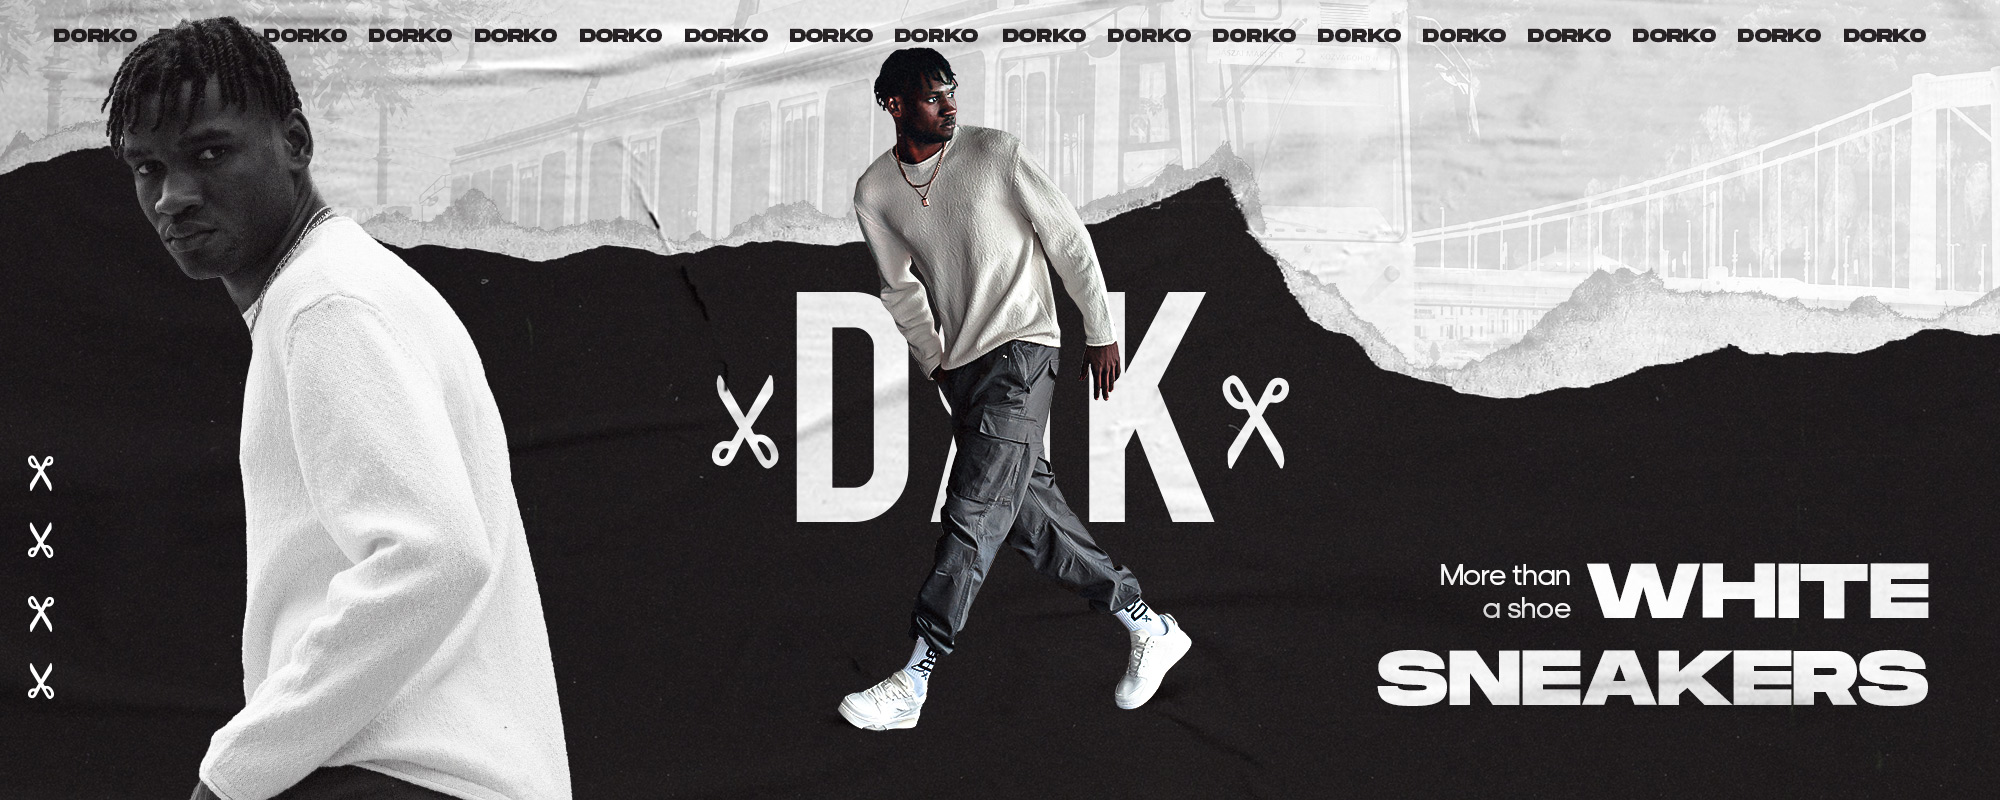 Dorko white sneakers in one place.